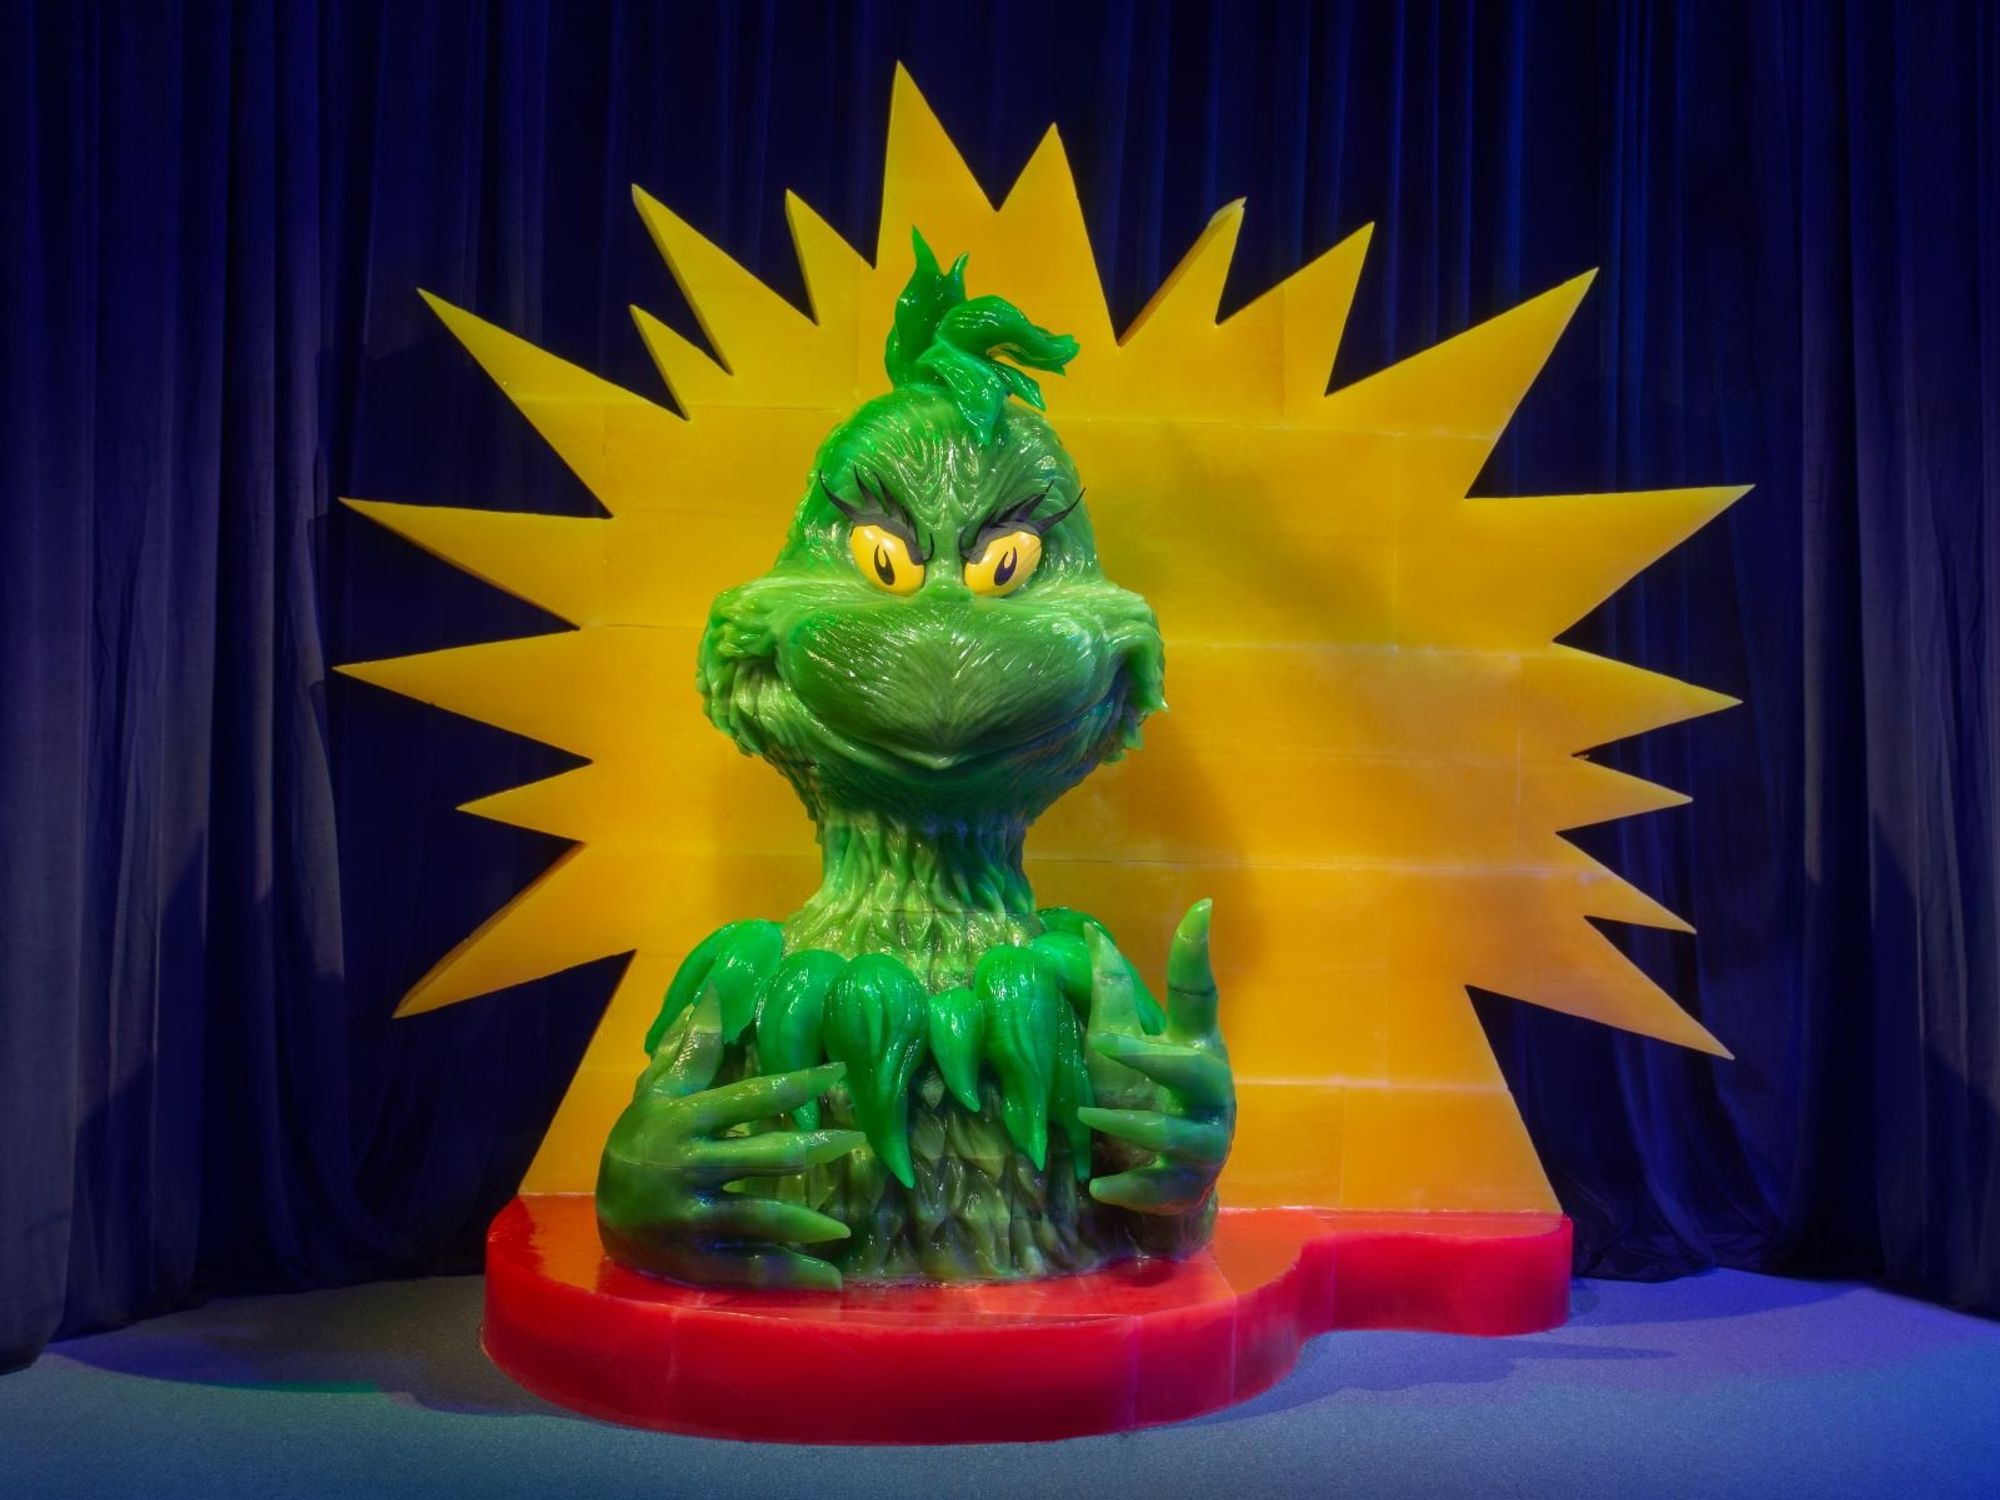 How The Grinch Got A Green Face Is Viewed From The Front